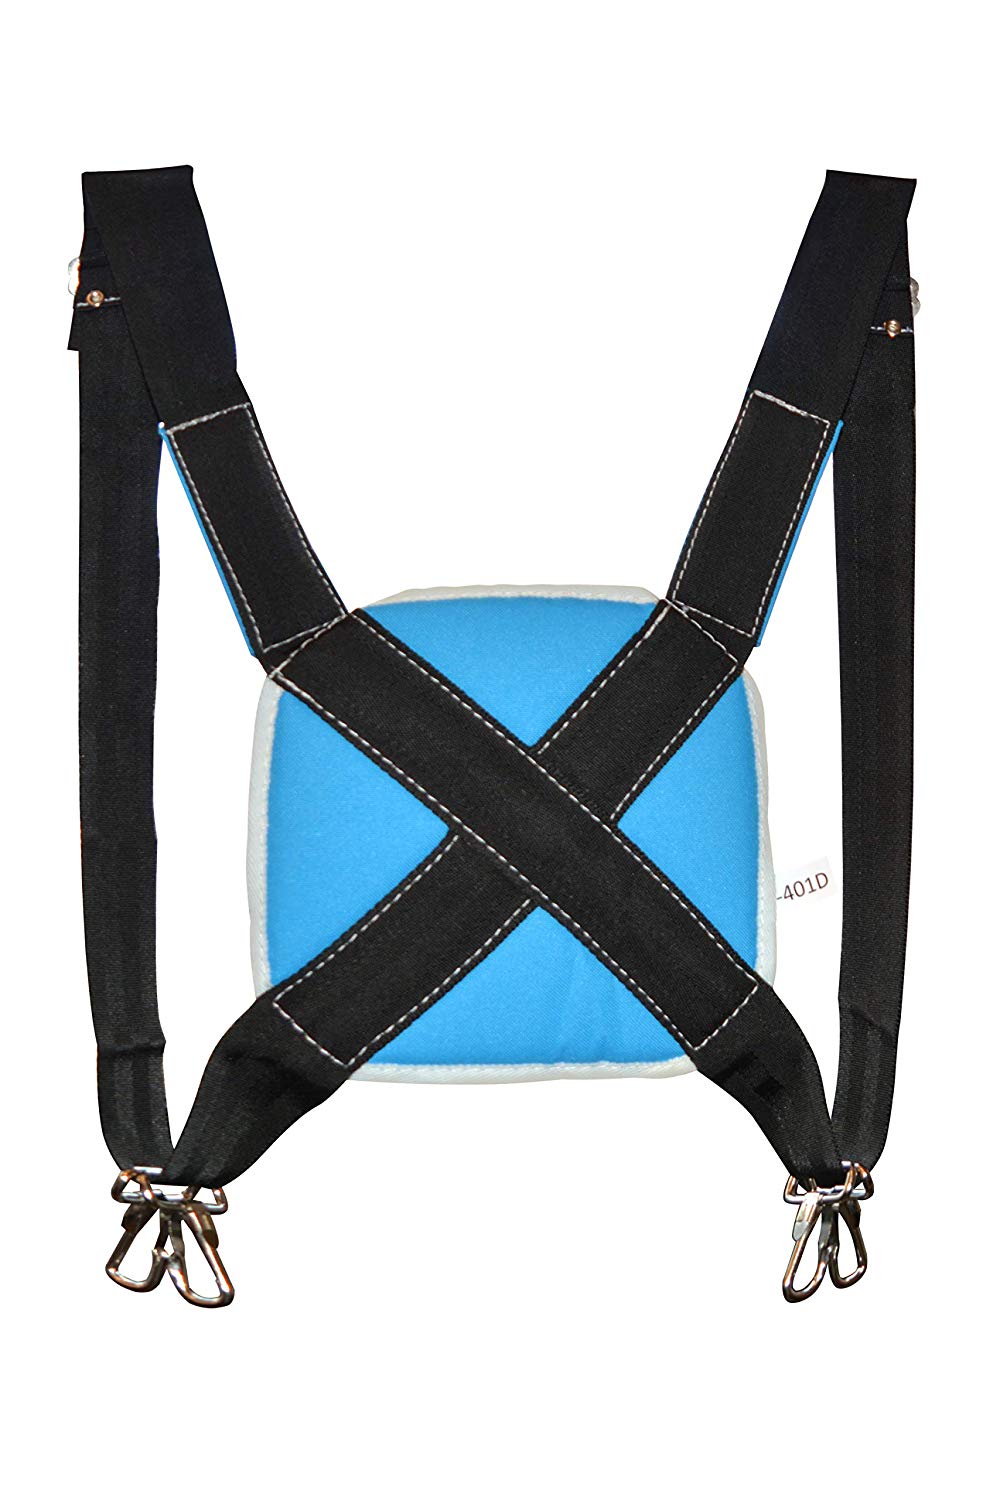 Zenport AG401D Deluxe Padded Harness for Fruit Harvest Picking Bucket and Bags - Click Image to Close